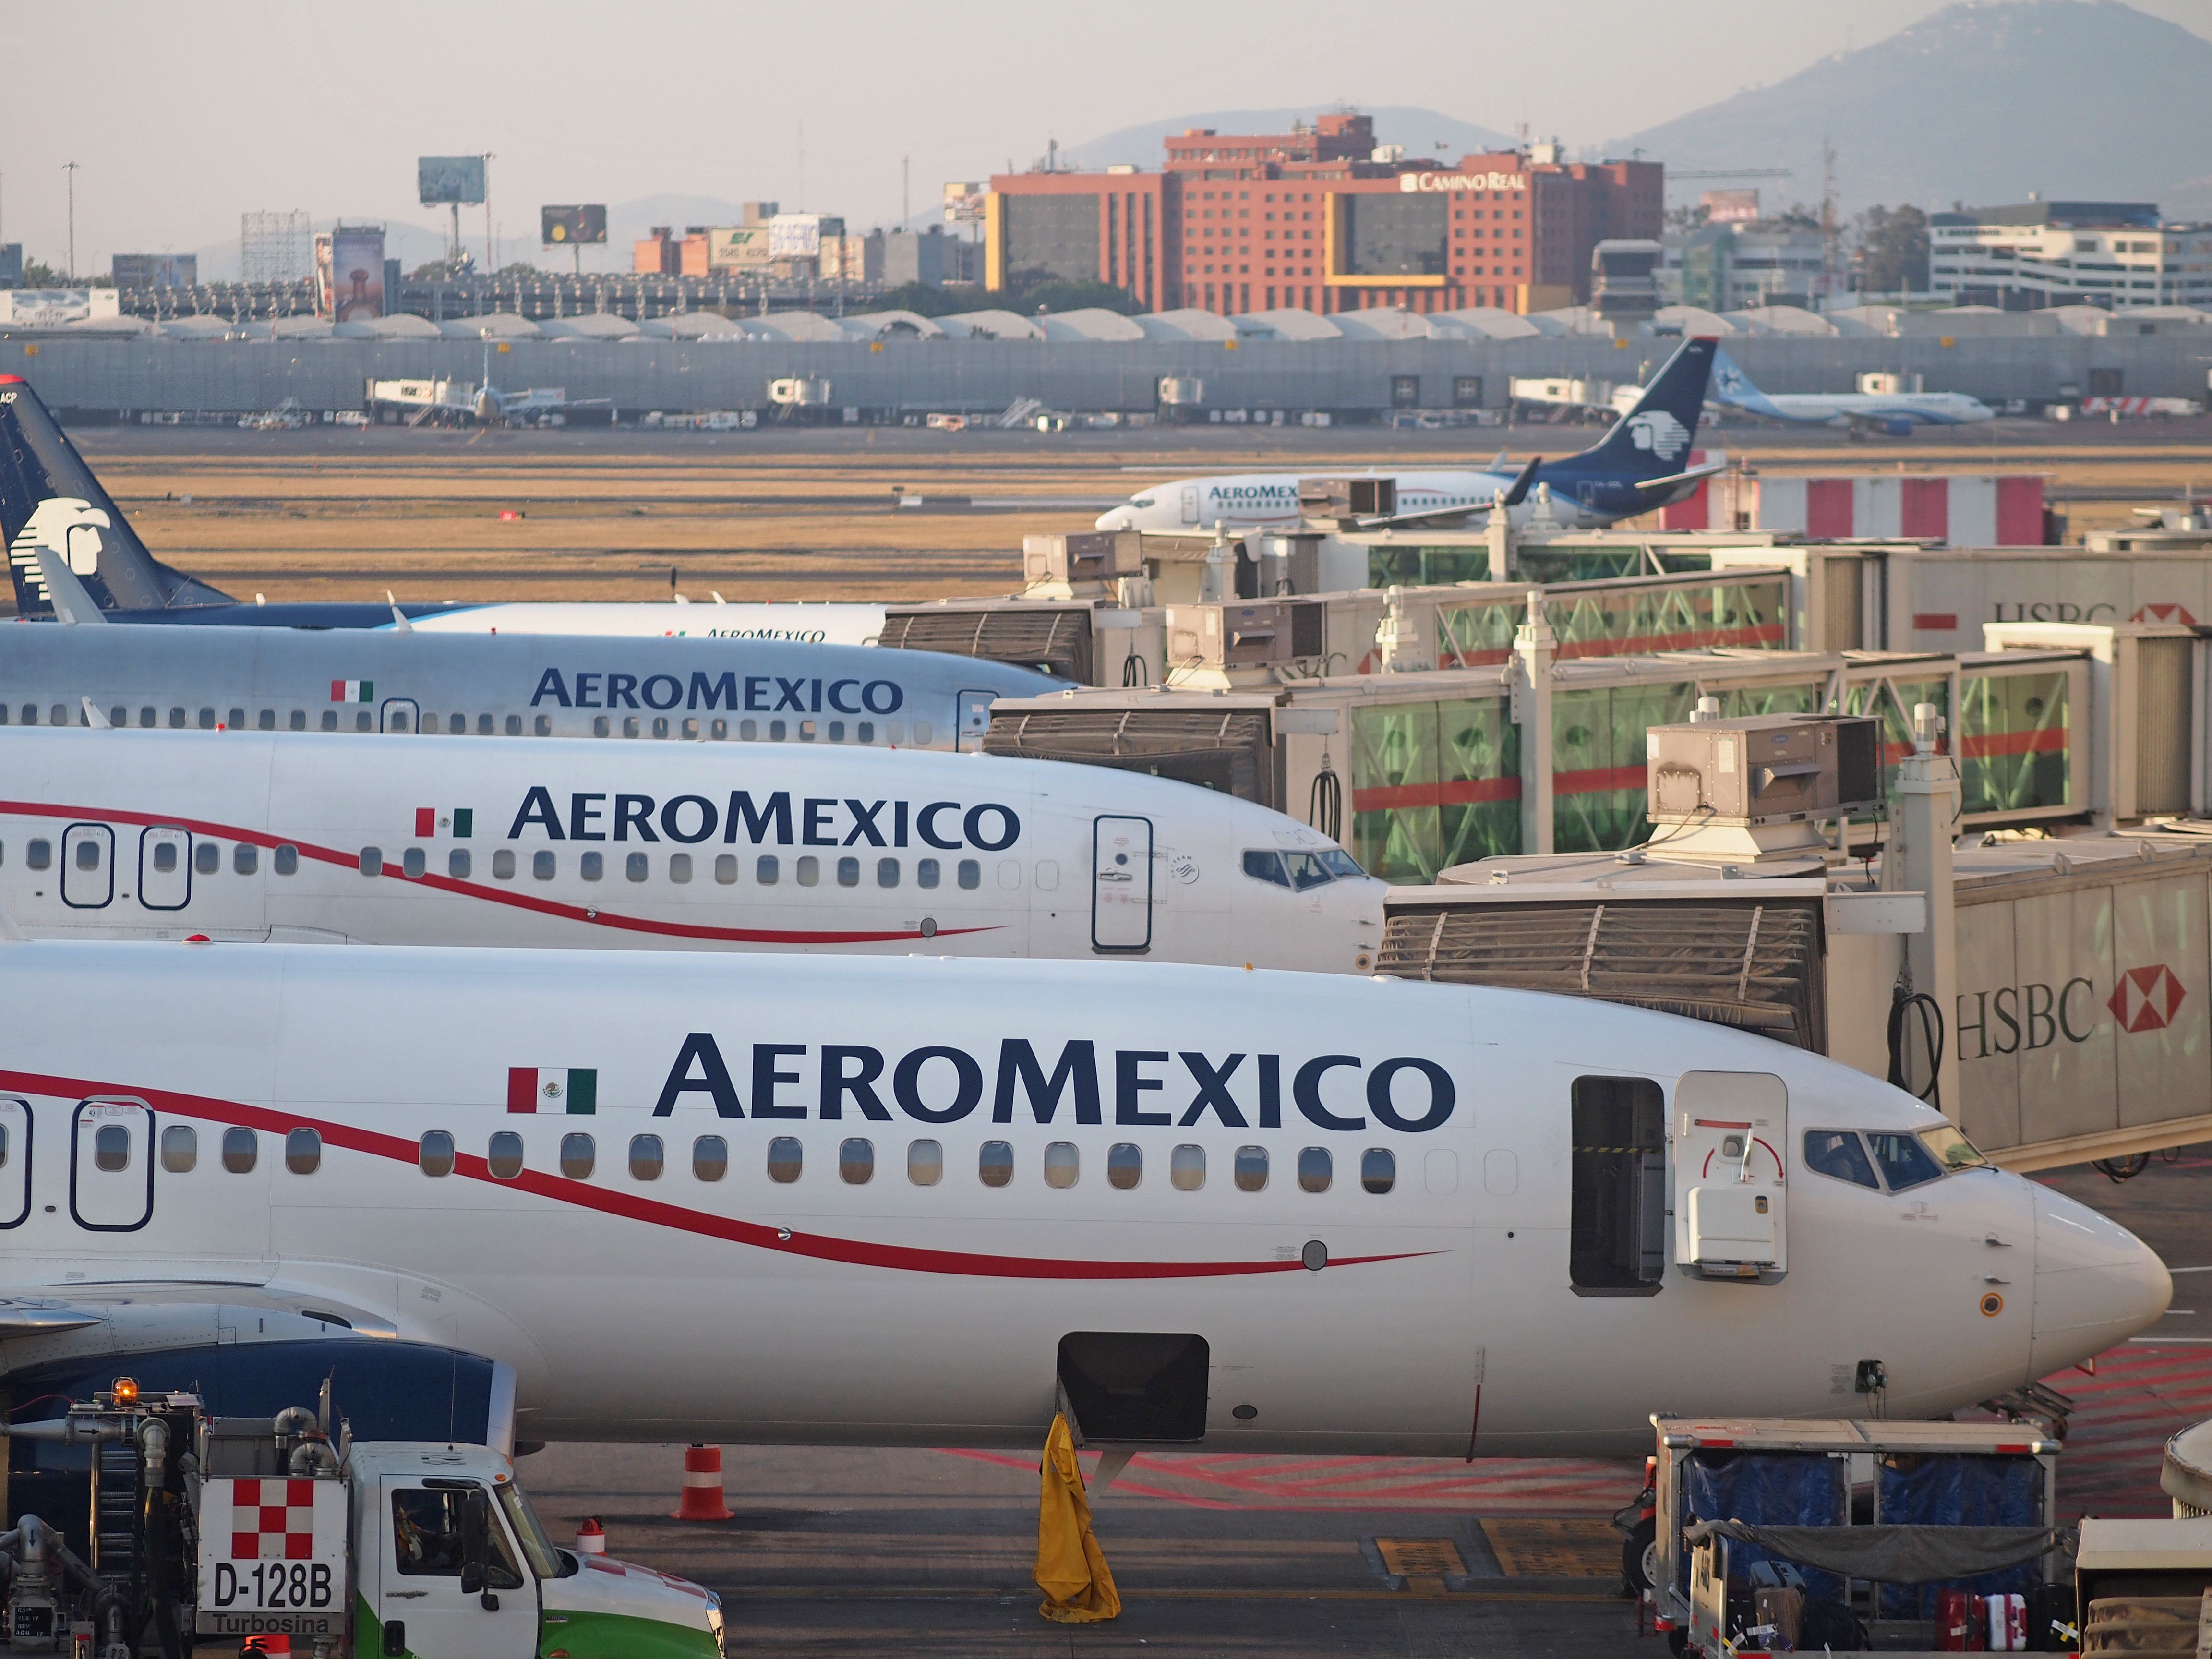 Several Aeromexico aircraft lined up in Mexico City